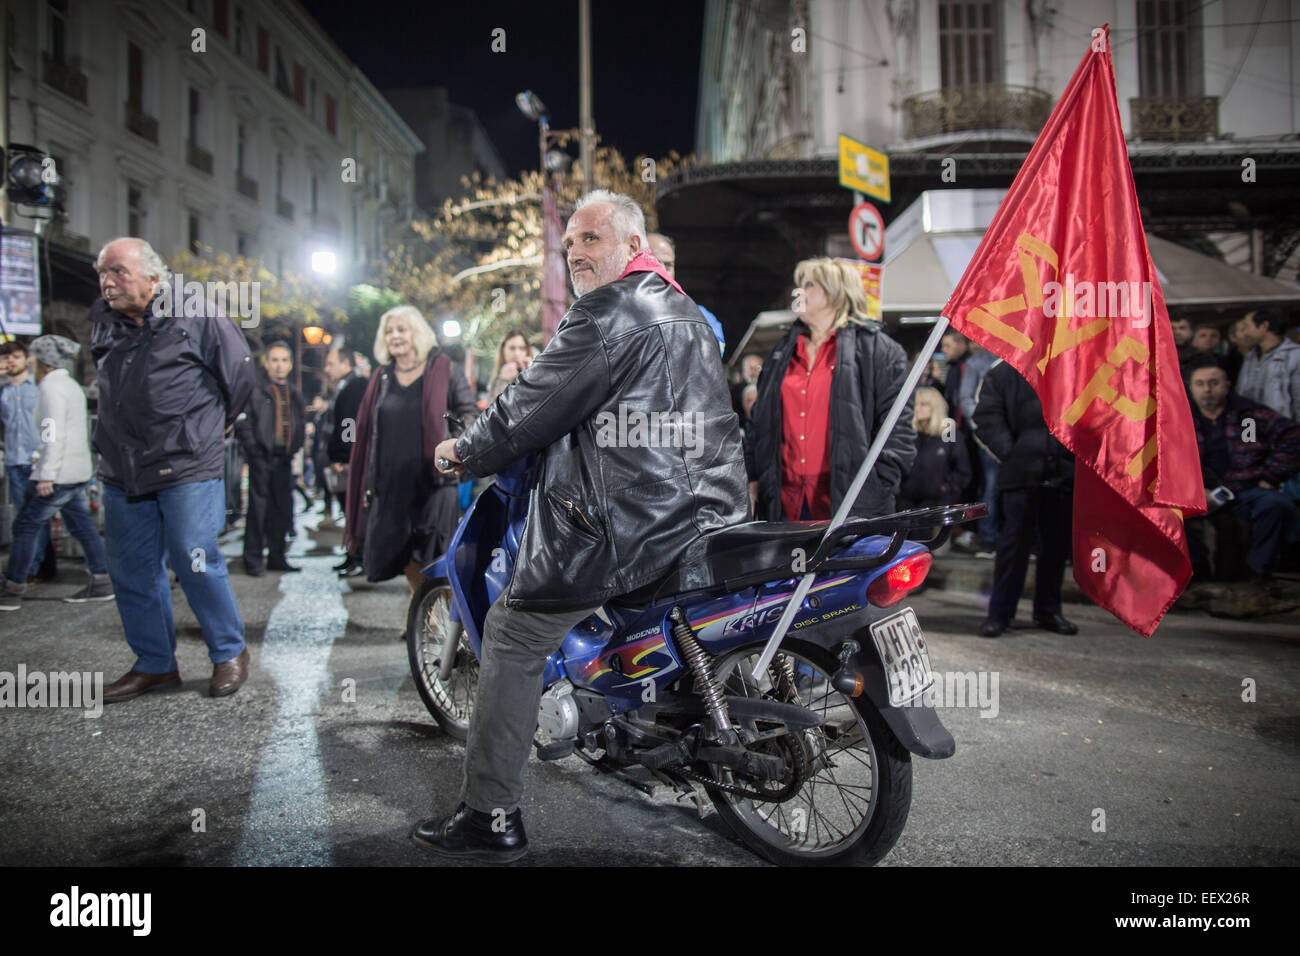 A supporter of he radical left main opposition party SYRIZA is seen with a red flag on his motorbike prior to the last preelection rally of the Alexis Tsipras, in Athens, 22 January 2015. Greece's leftist, anti-austerity Syriza party has widened its lead at the top for the 25 January 2015 elections. Michael Kappeler/dpa (zu dpa "Vor griechischer Schicksalswahl Linkspartei deutlich vorn" am 22.01.2015) Stock Photo